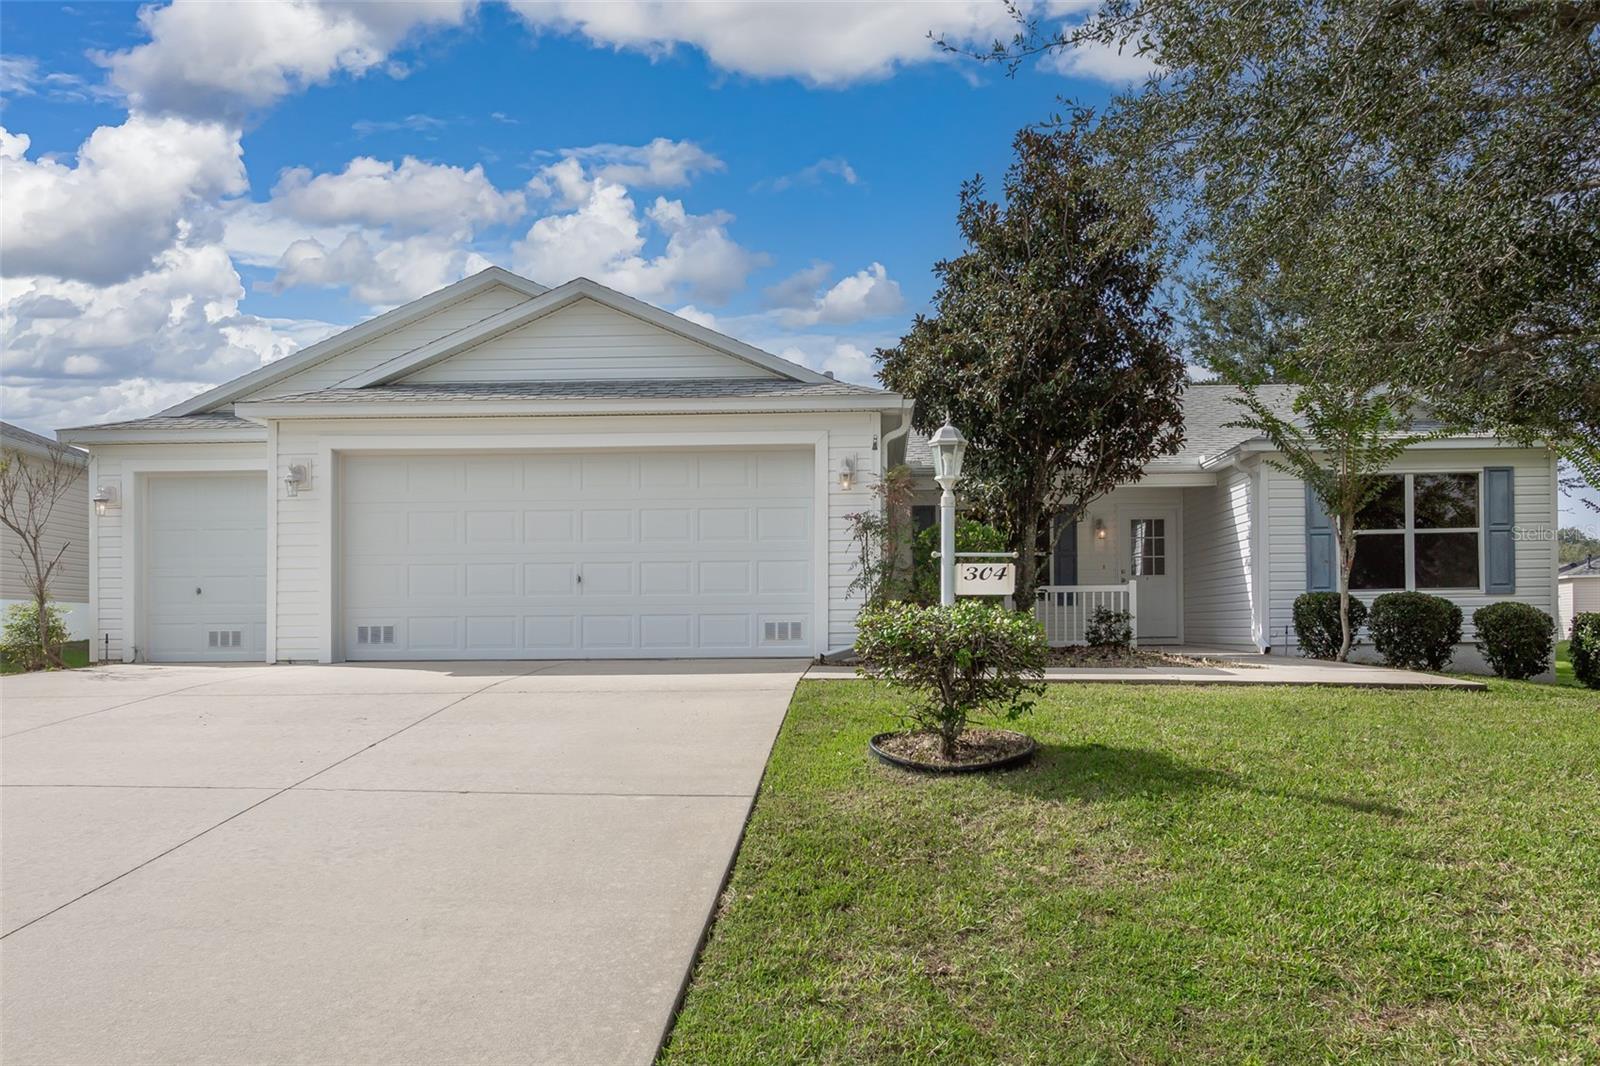 Photo one of 304 Knoll Pl The Villages FL 32162 | MLS G5073361